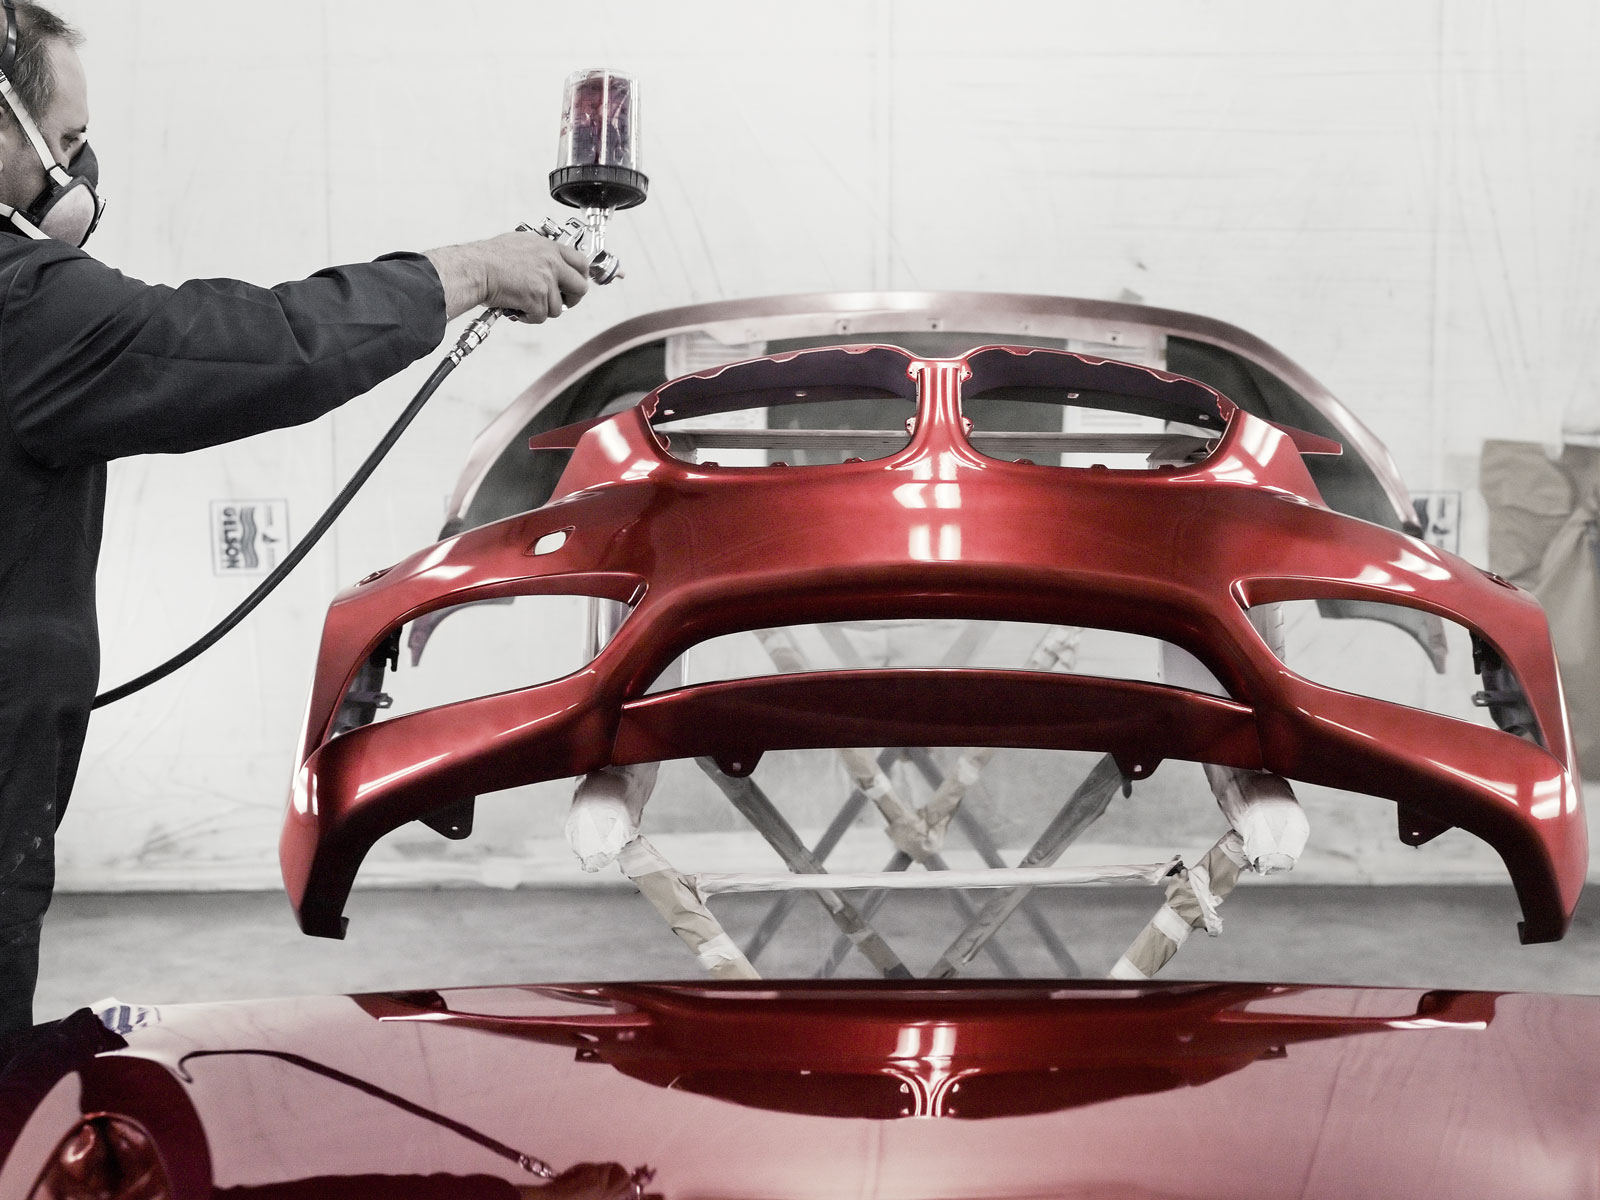 BMW Zagato Coupe, 2012 - Painting the 'Rosso Vivace' exterior colour in Milan 